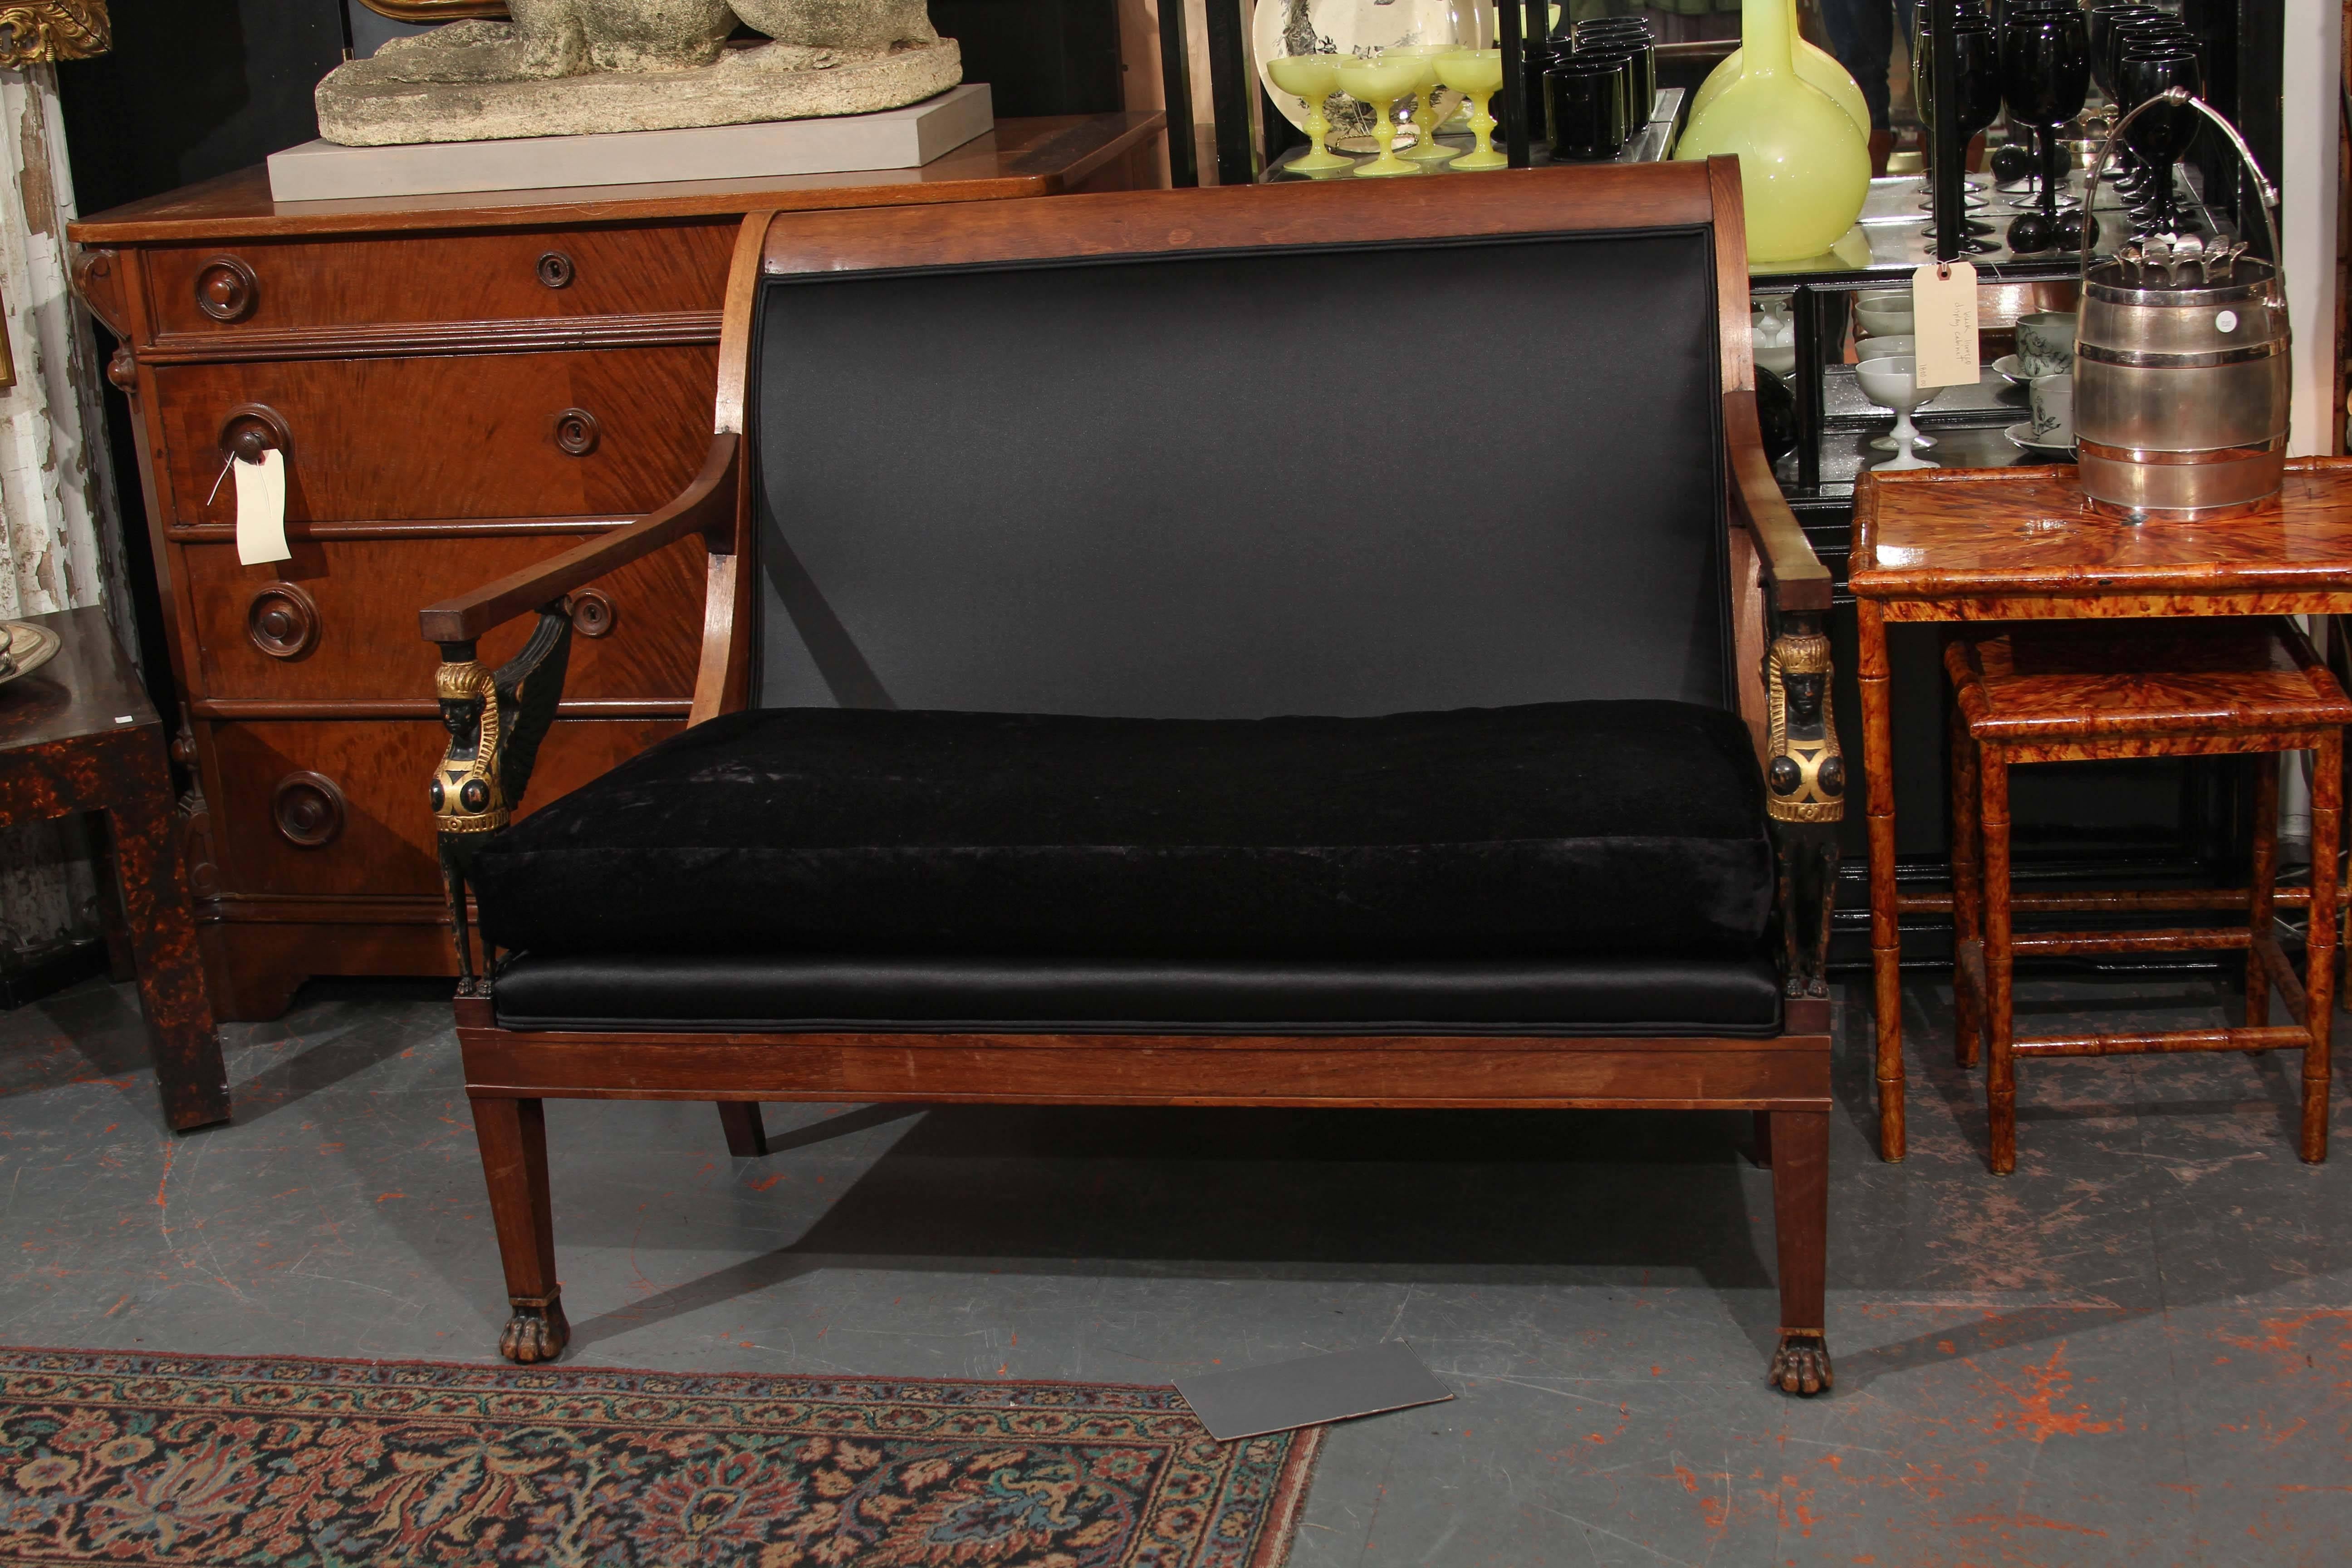 Egyptian Empire style small sofa/settee with carved wood winged sphinx armrests upholstered in black velvet and heavy sateen.